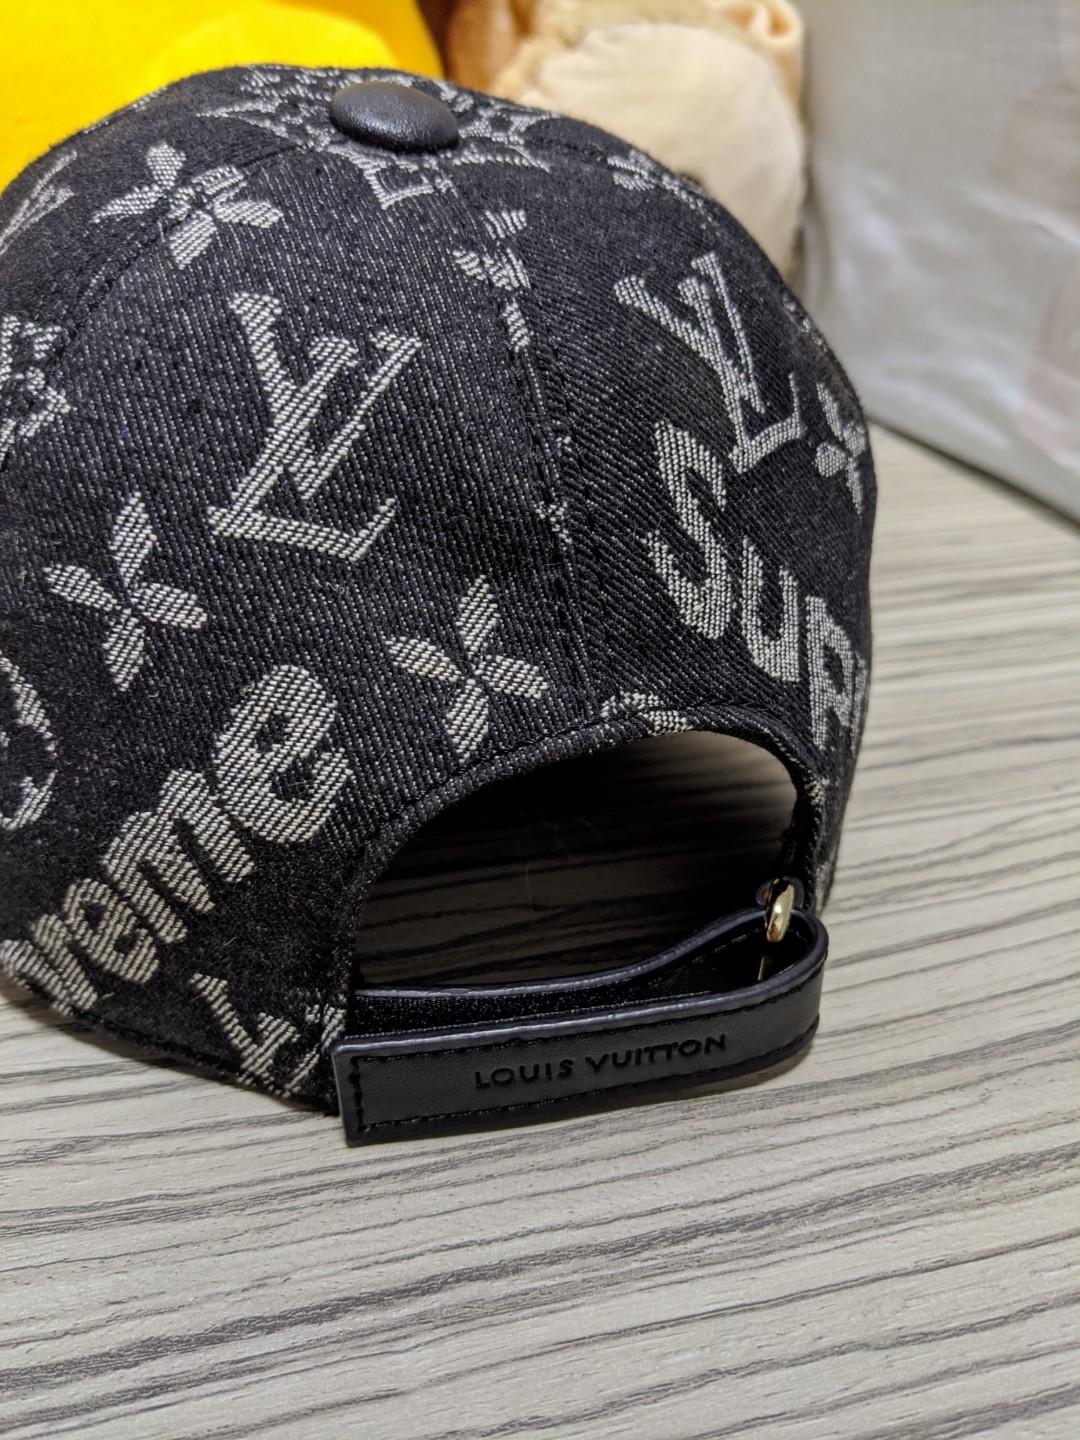 Supreme x LV cap 💯 authentic, Men's Fashion, Watches & Accessories, Cap &  Hats on Carousell